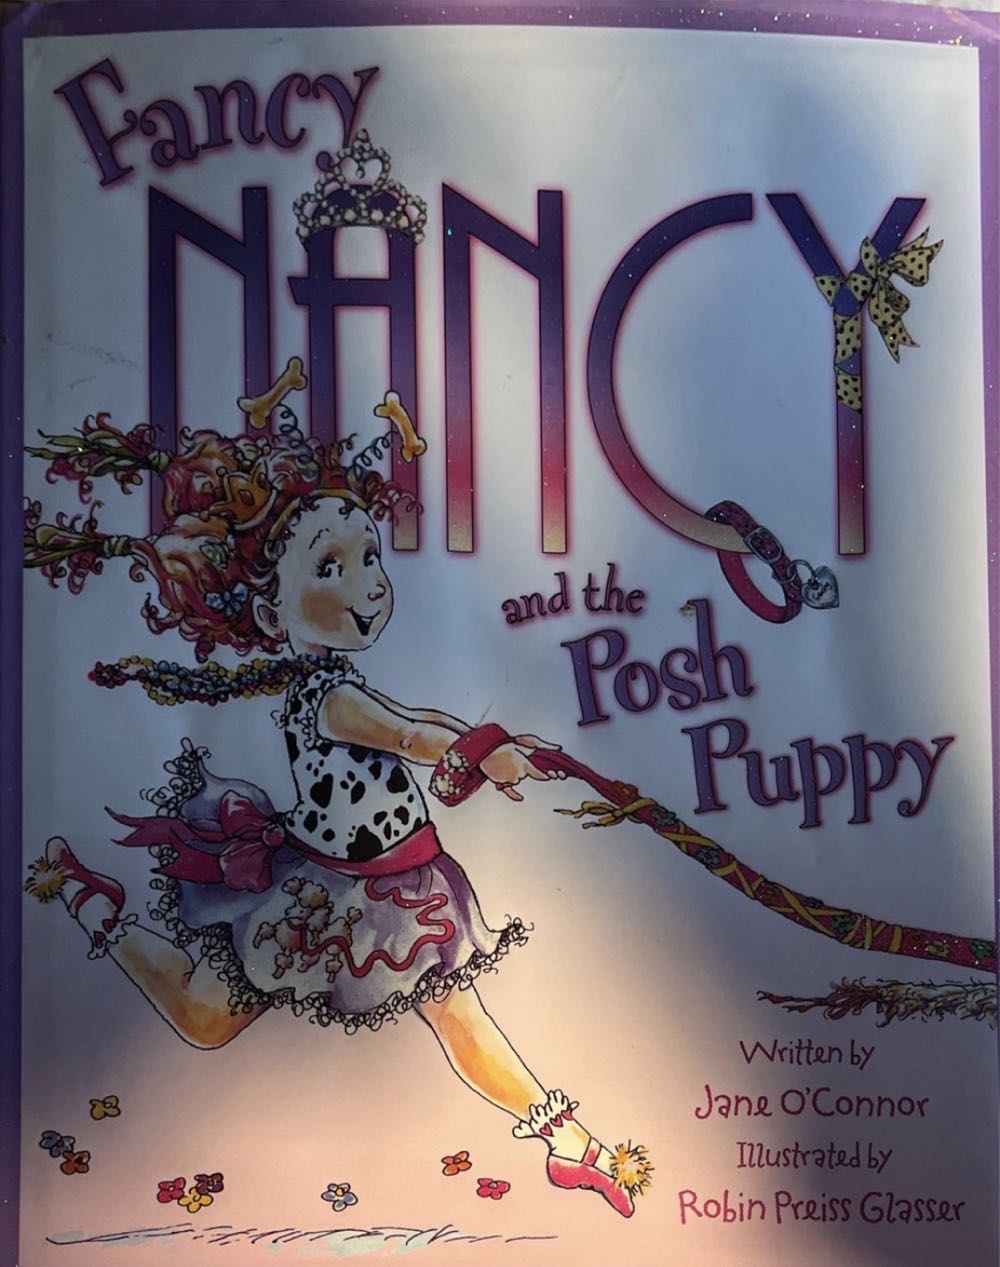 Fancy Nancy and the Posh Puppy - Jane O’Connor (Harper Collins Children’s - Hardcover) book collectible [Barcode 9780060542139] - Main Image 1